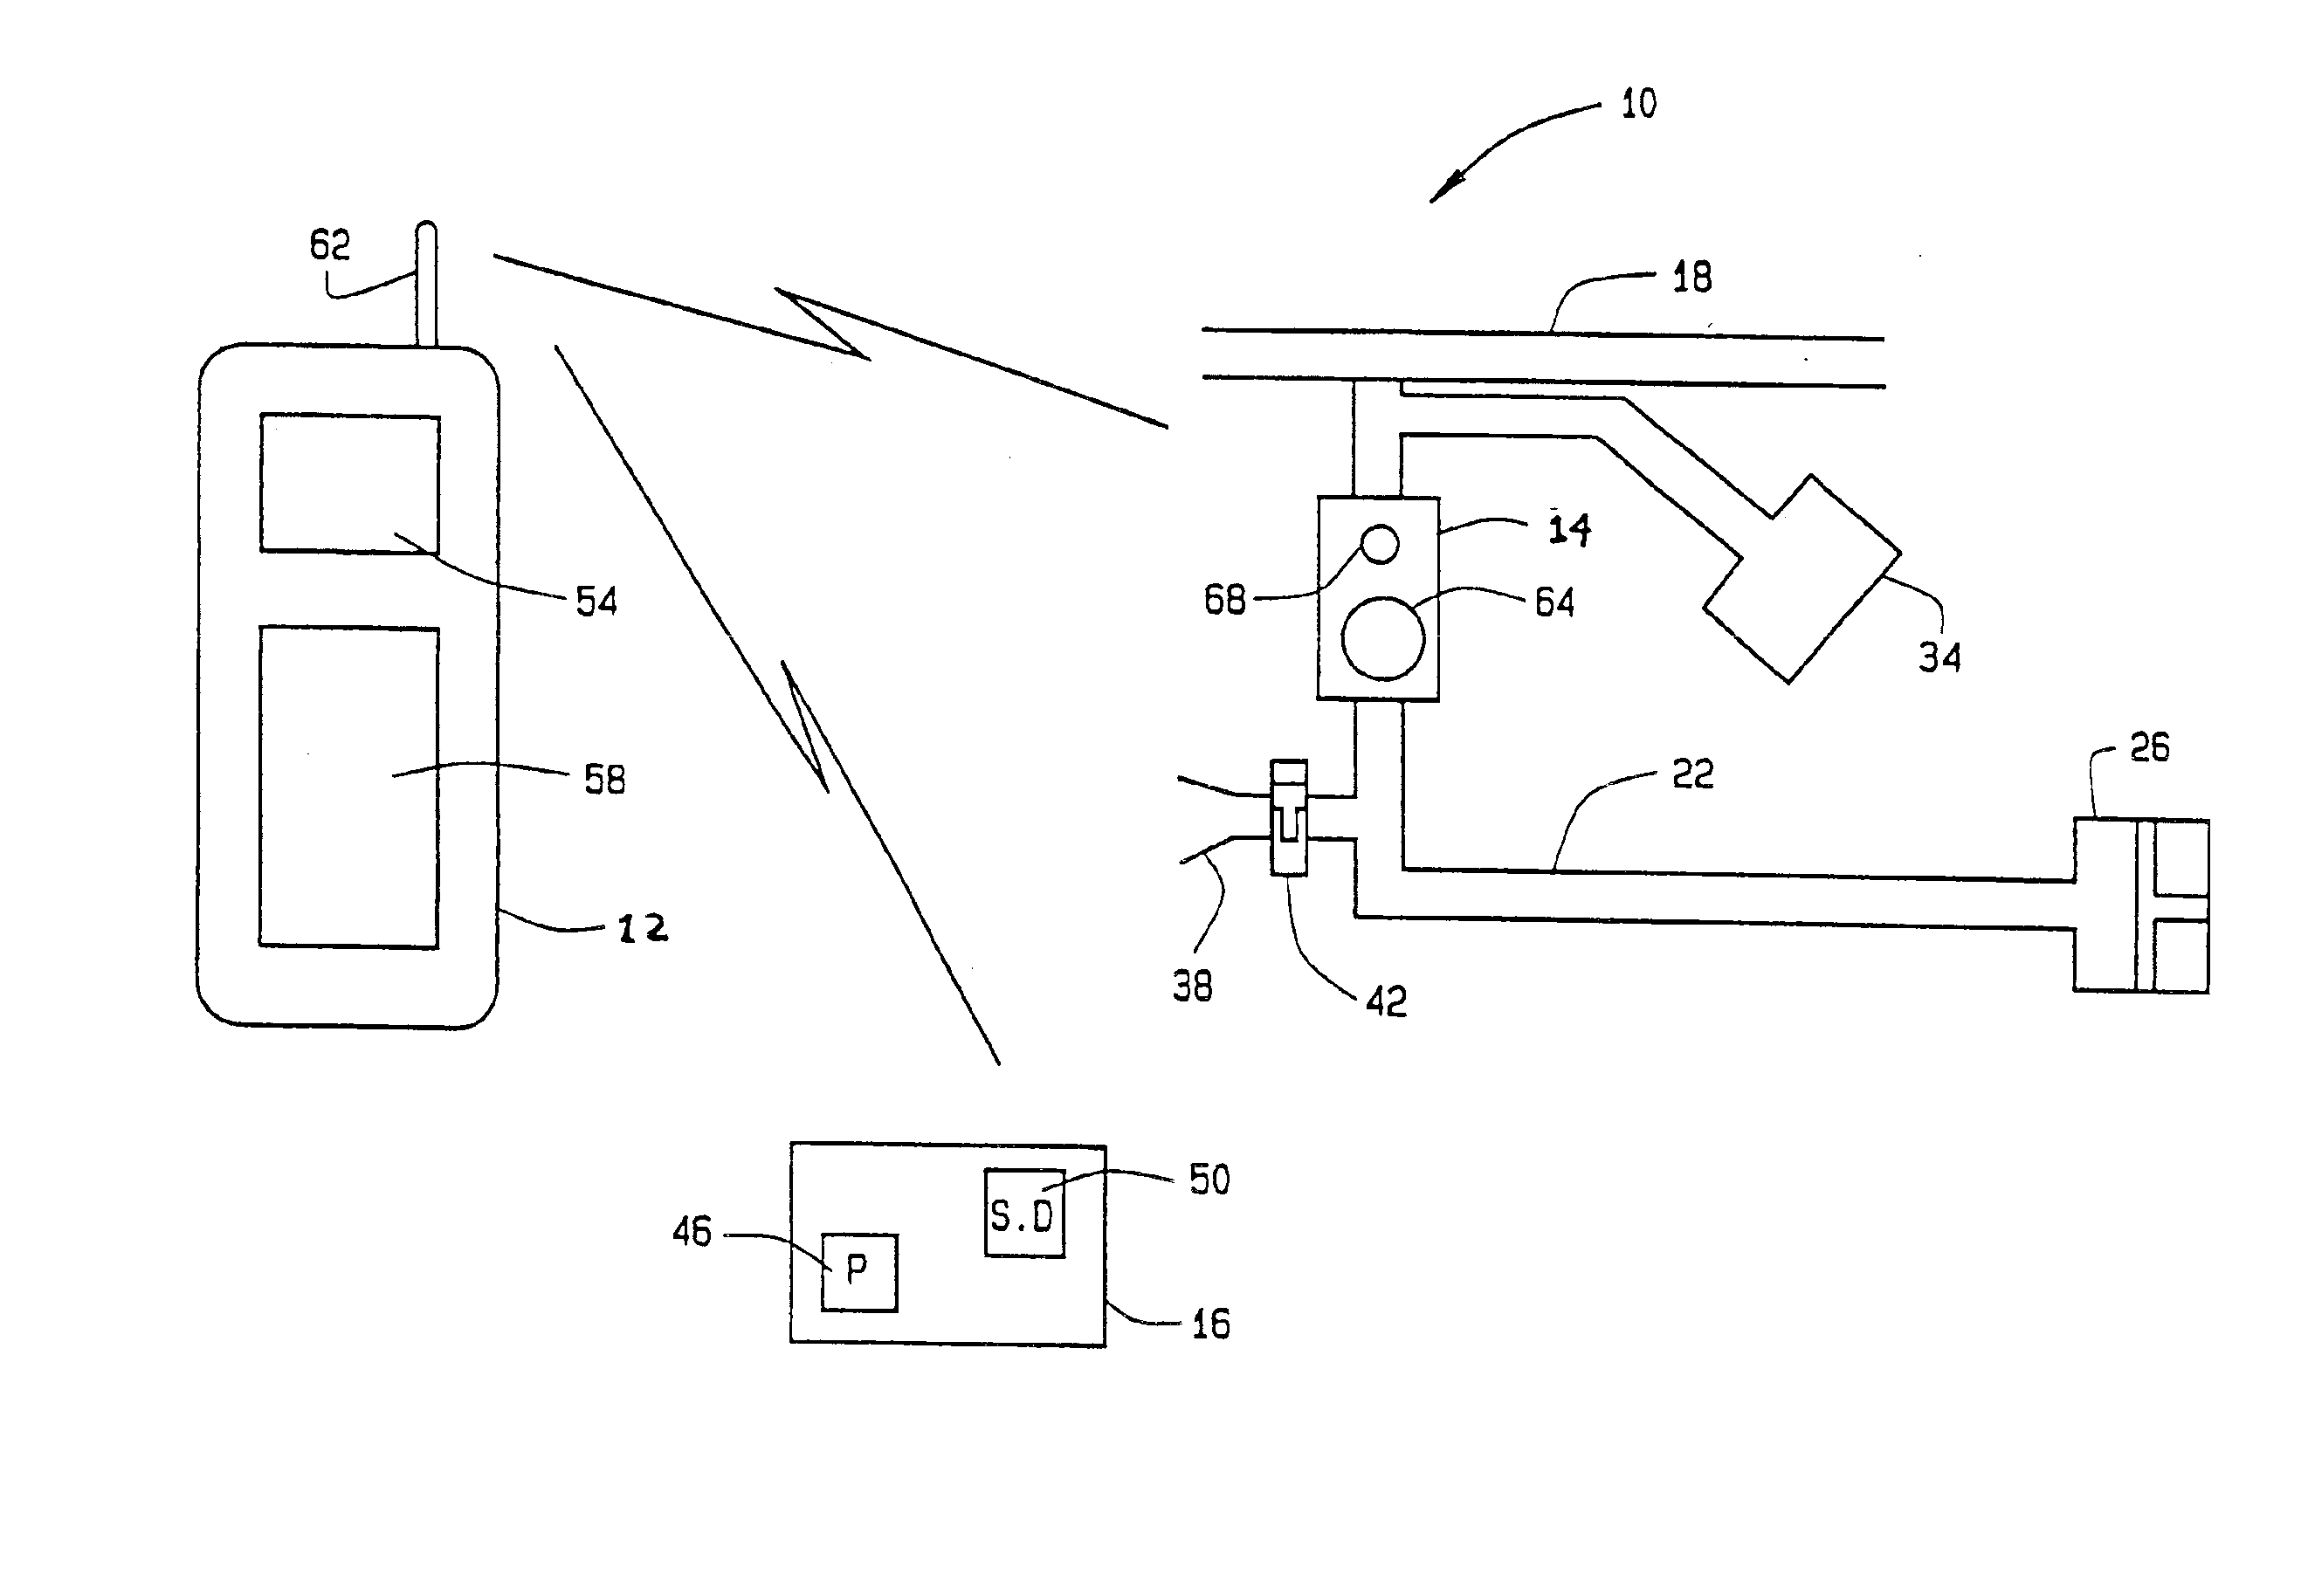 Brake system diagnostic using a hand-held radio device